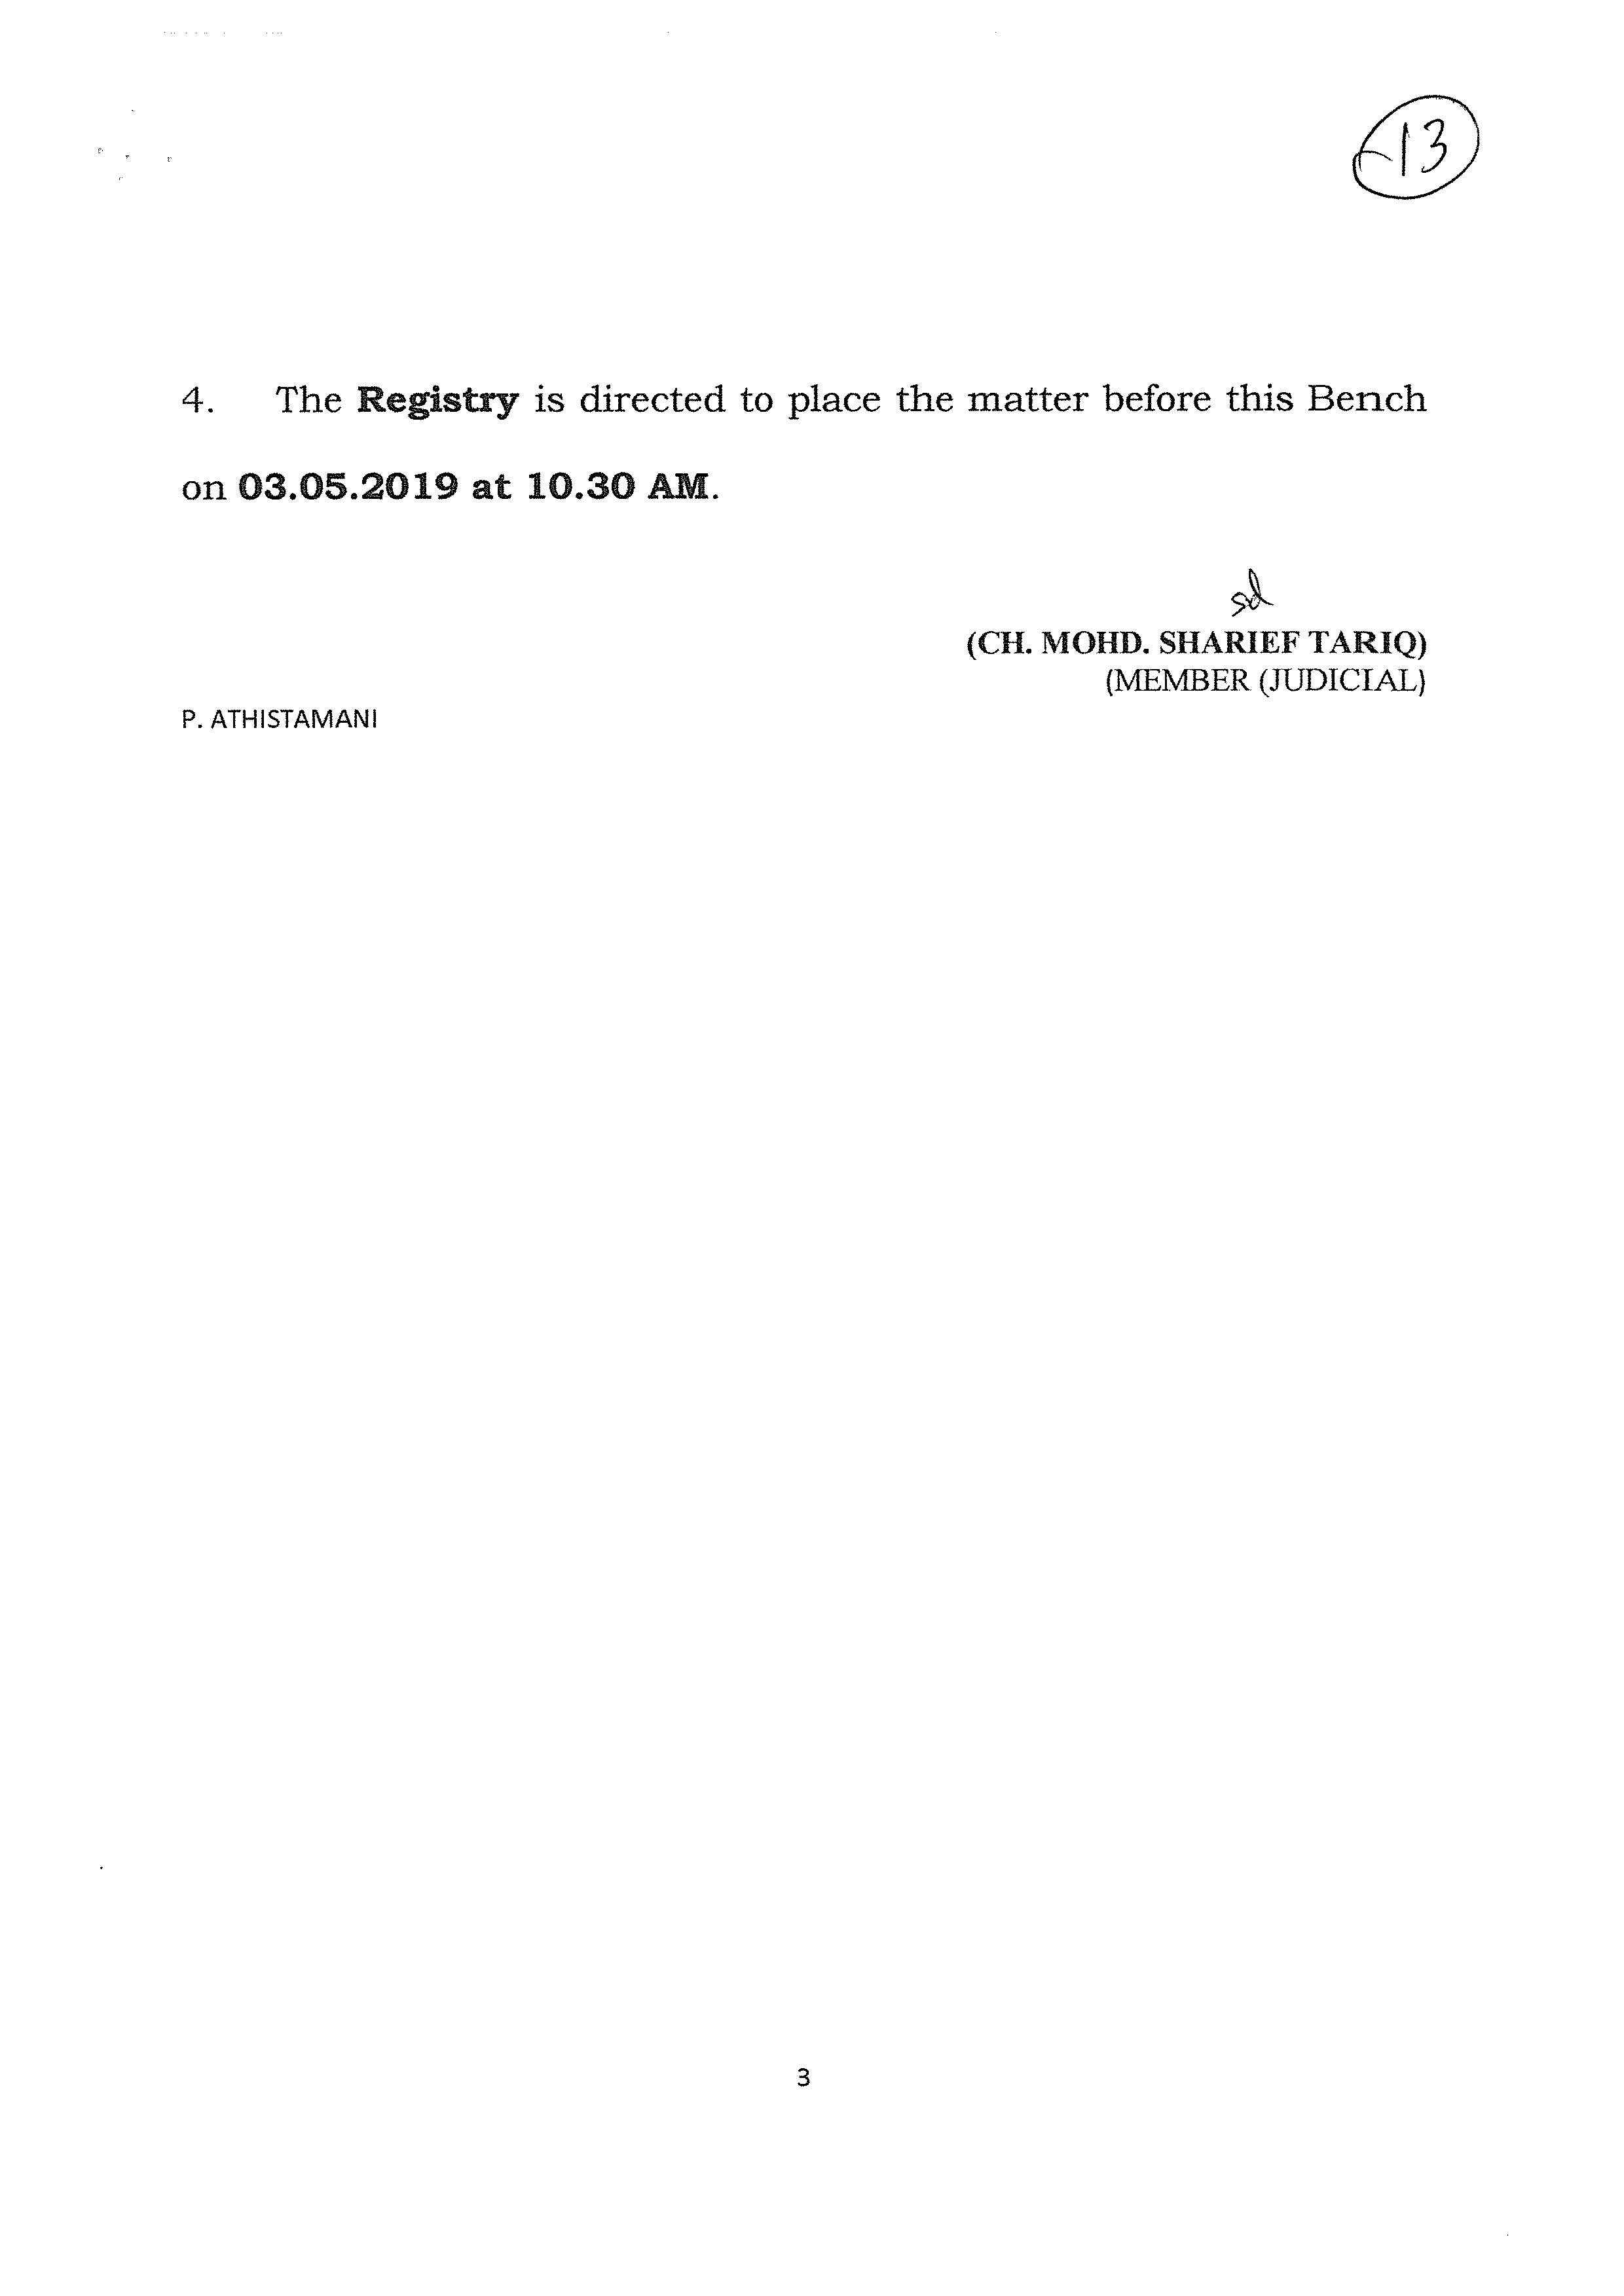 CP 1498 - NCLT Directions - 29012019 _Page_4